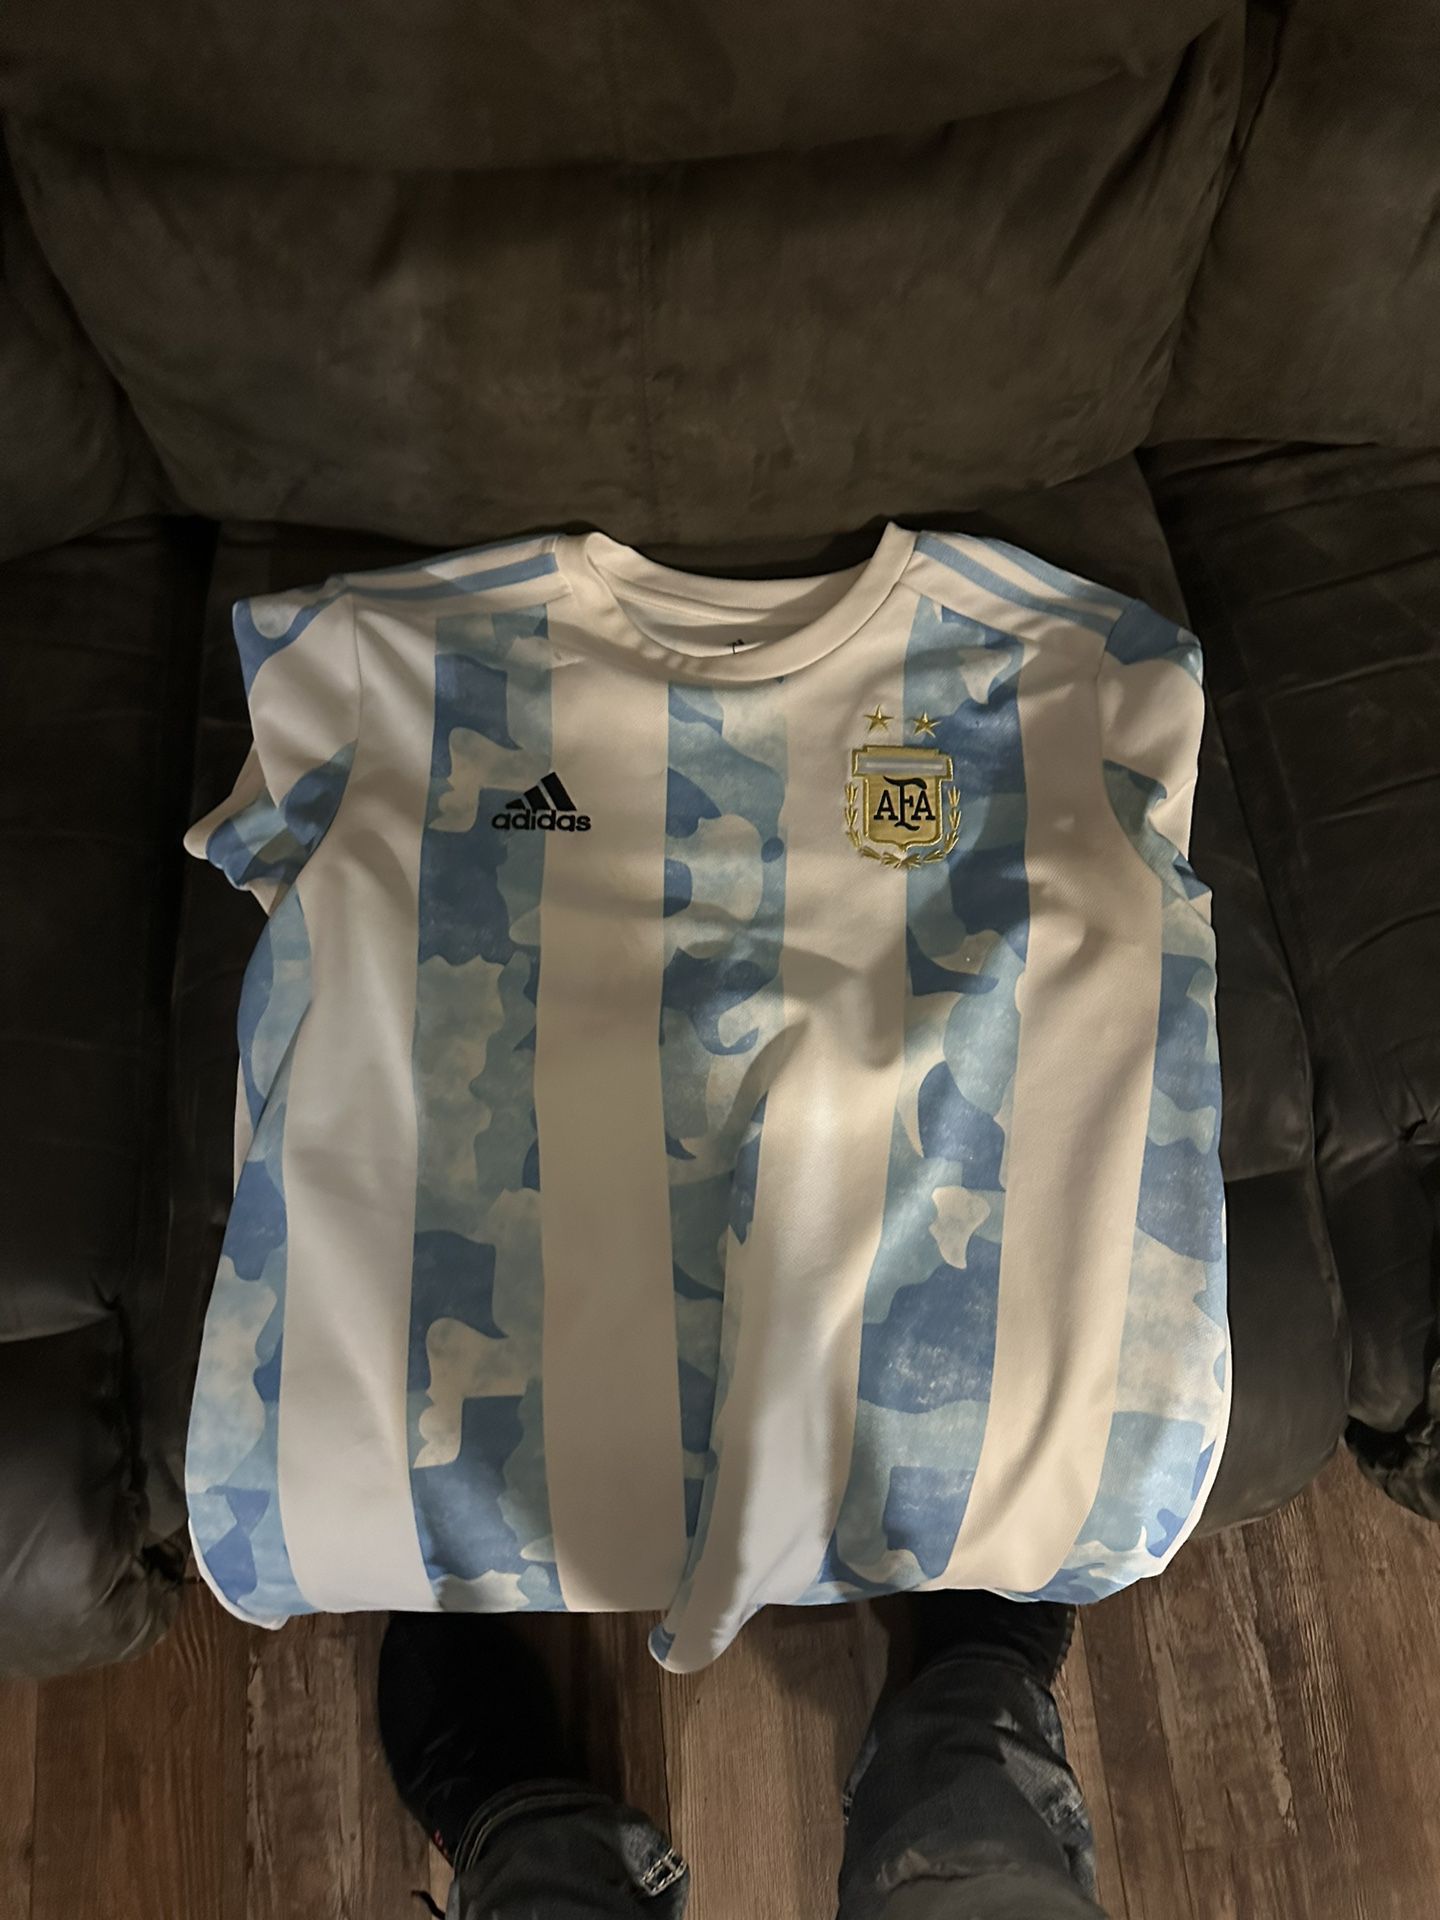 Argentina Kit Cost Me 90$ But Don’t Fit And Don’t Use It So 40$